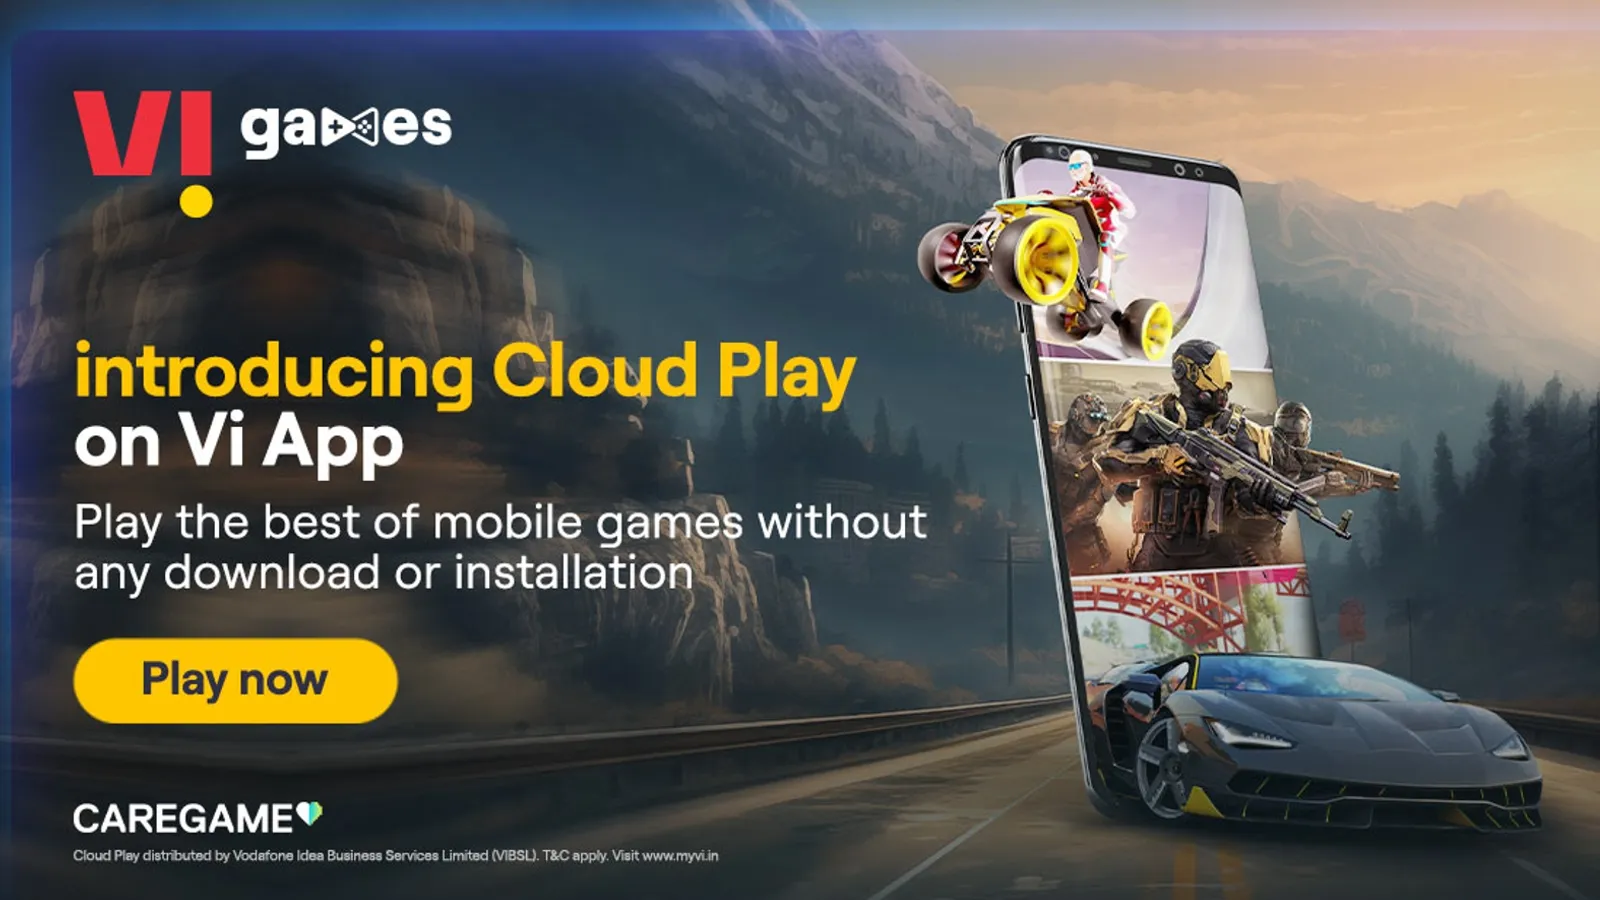 Vi launches ‘Cloud Play’ mobile cloud gaming service